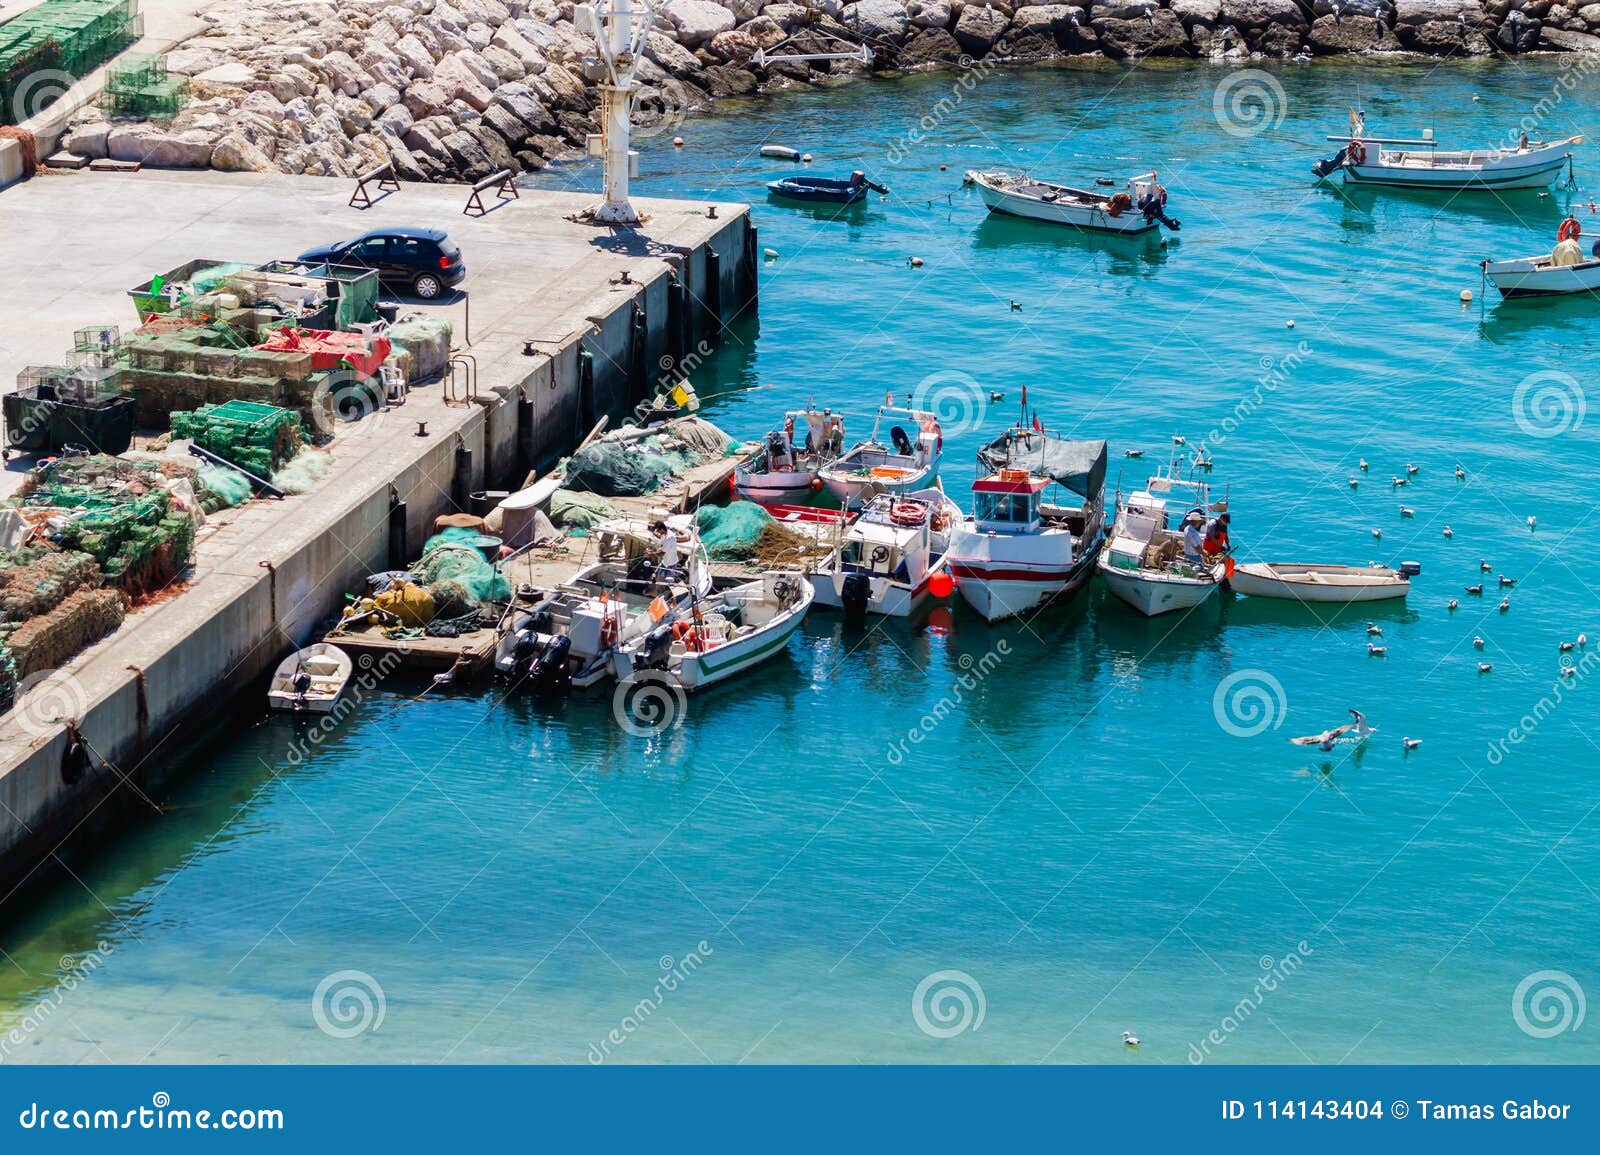 aerial view of fihsing boats in the porto de abrigo de albufeira, albufeira bay in albufeira, portugal